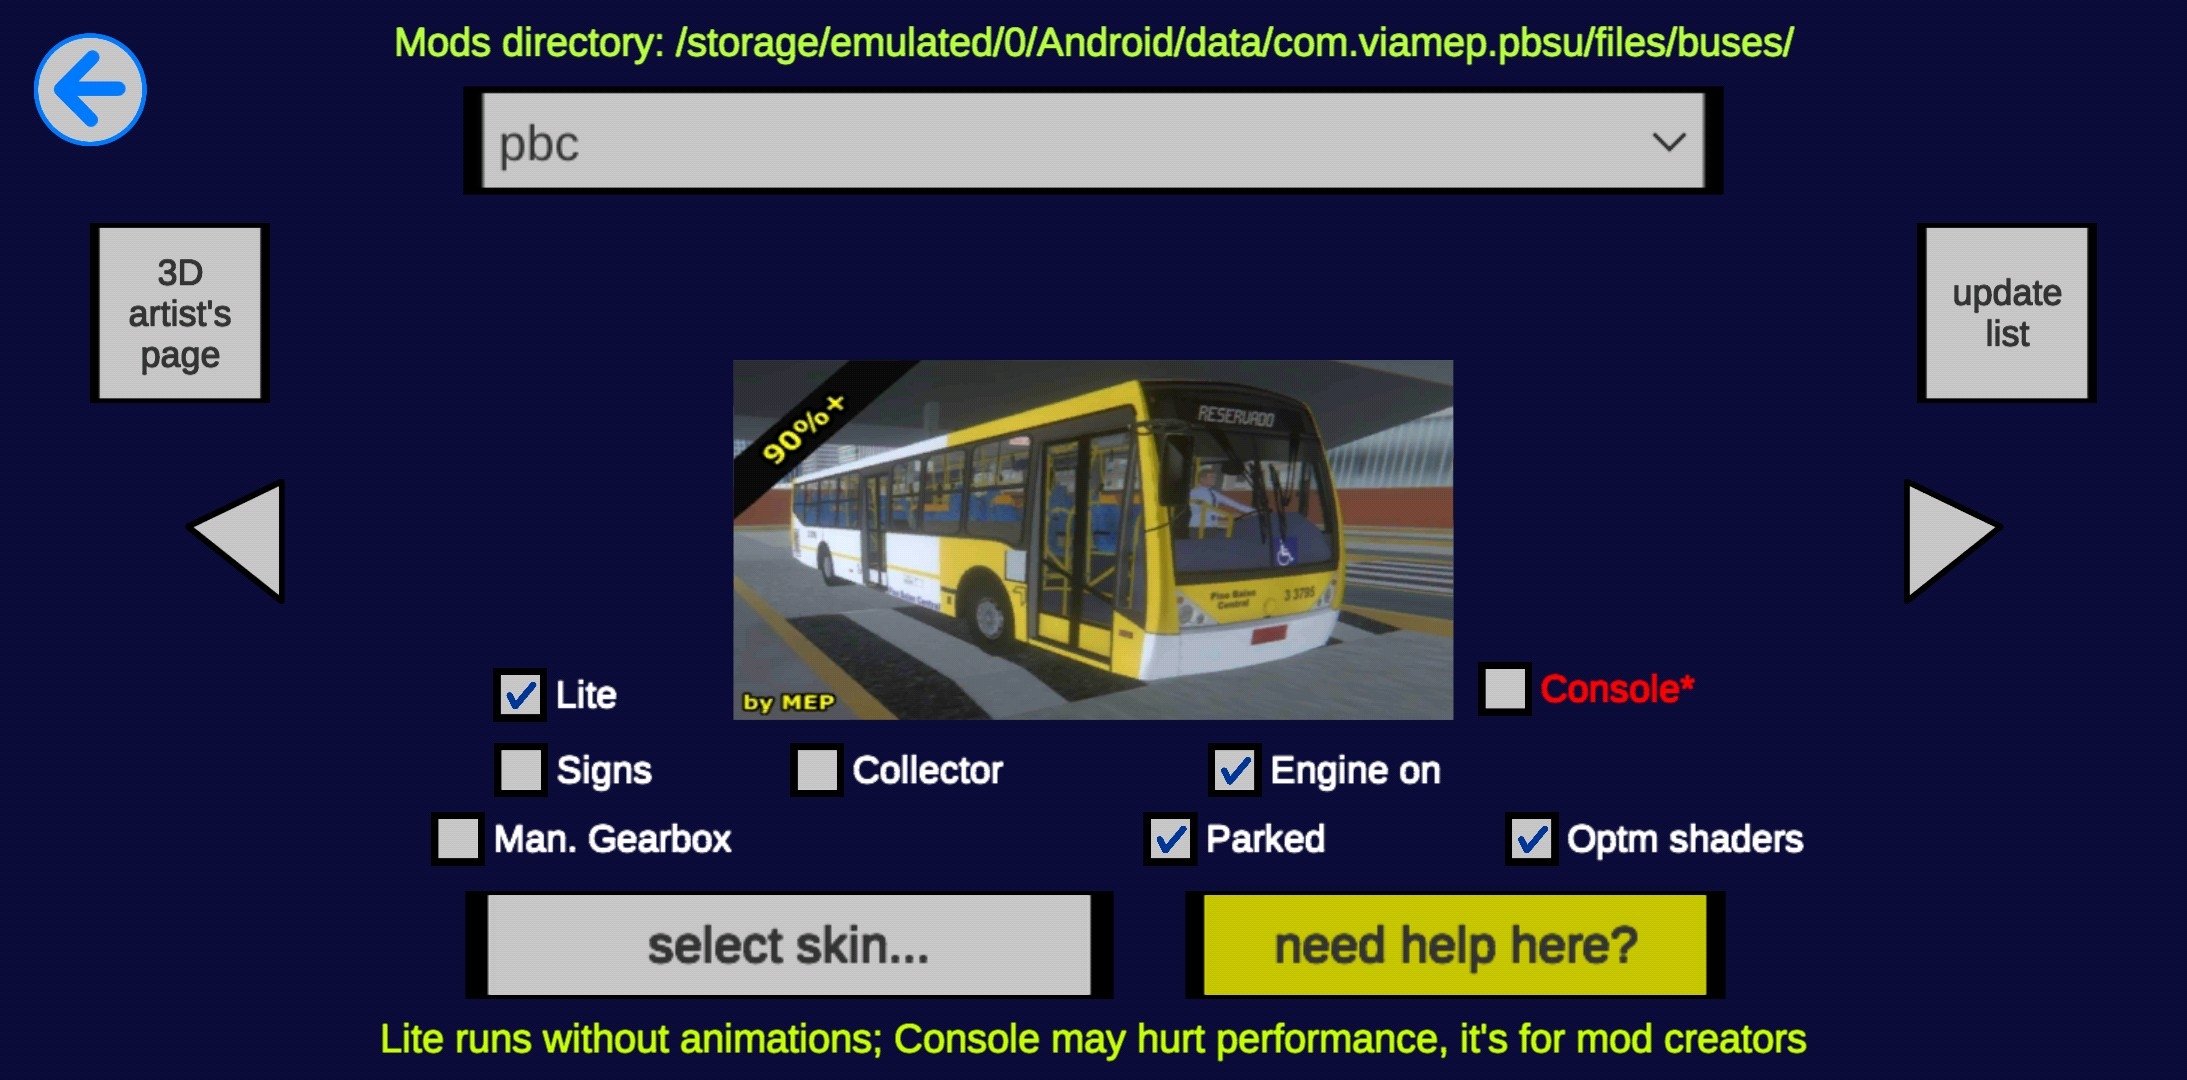 Proton Bus Simulator APK Download for Android Free